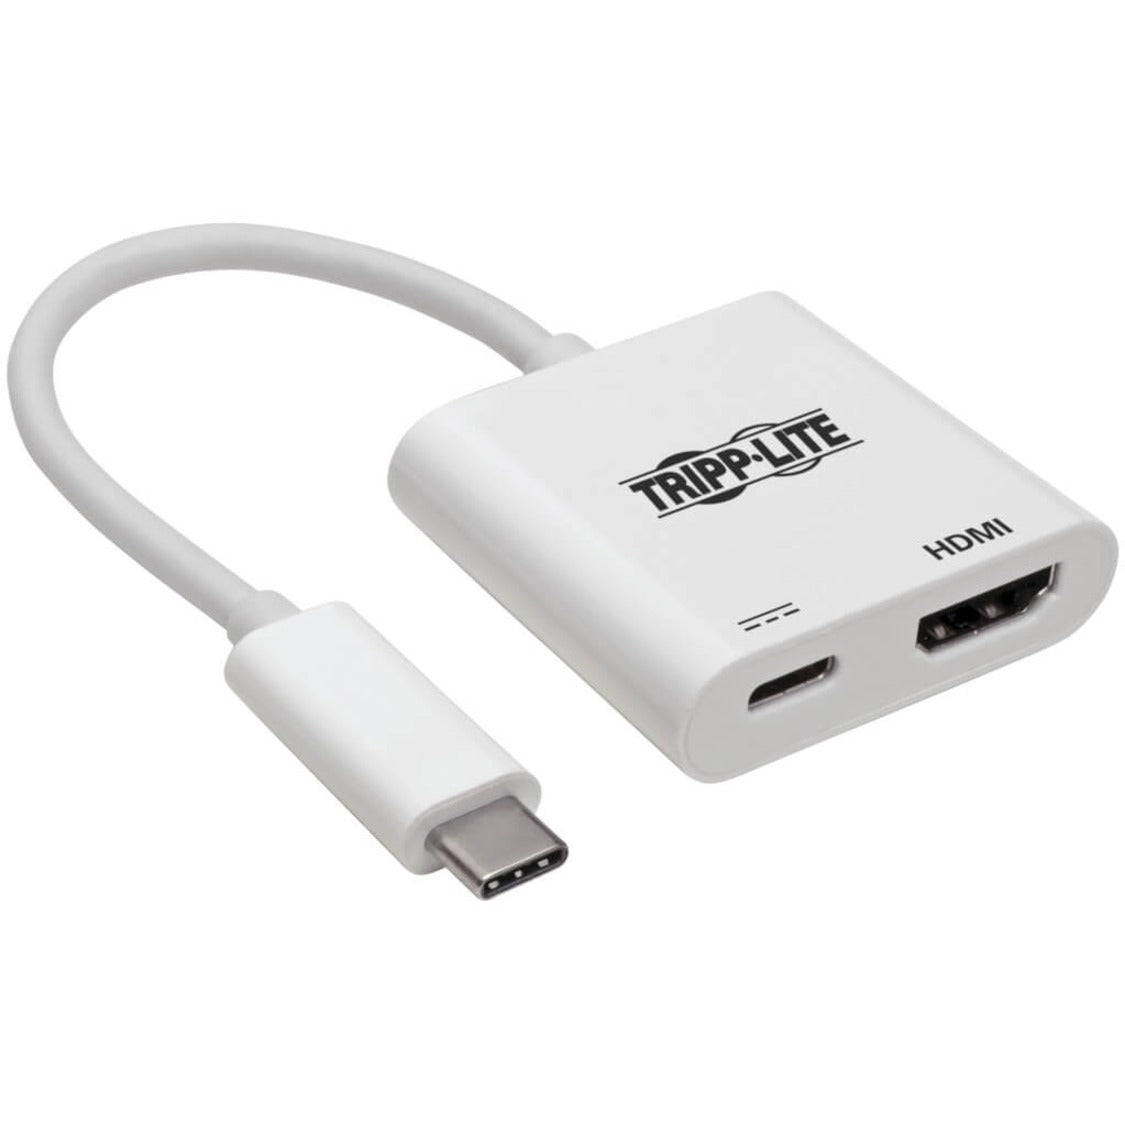 Tripp Lite U444-06N-H4K6WC USB-C 3.1 to HDMI 4K Adapter, M/F, White - Connect Your Devices with Ease